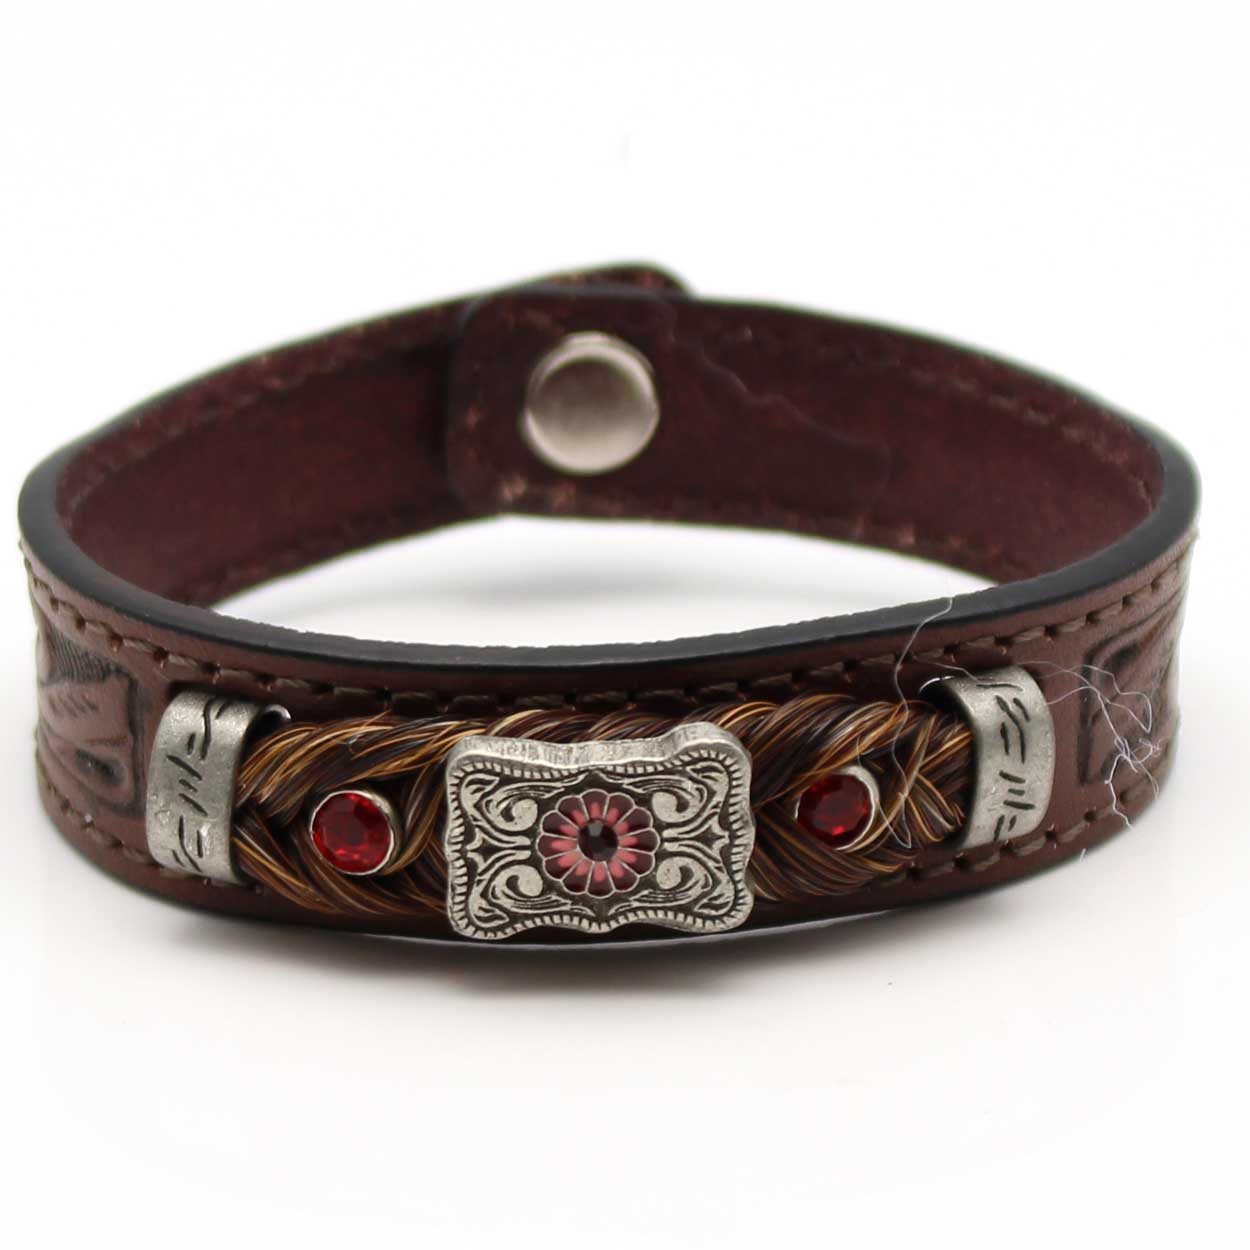 Stamped Leather & Brown Horse Hair Bracelet With Metal Accents - Red